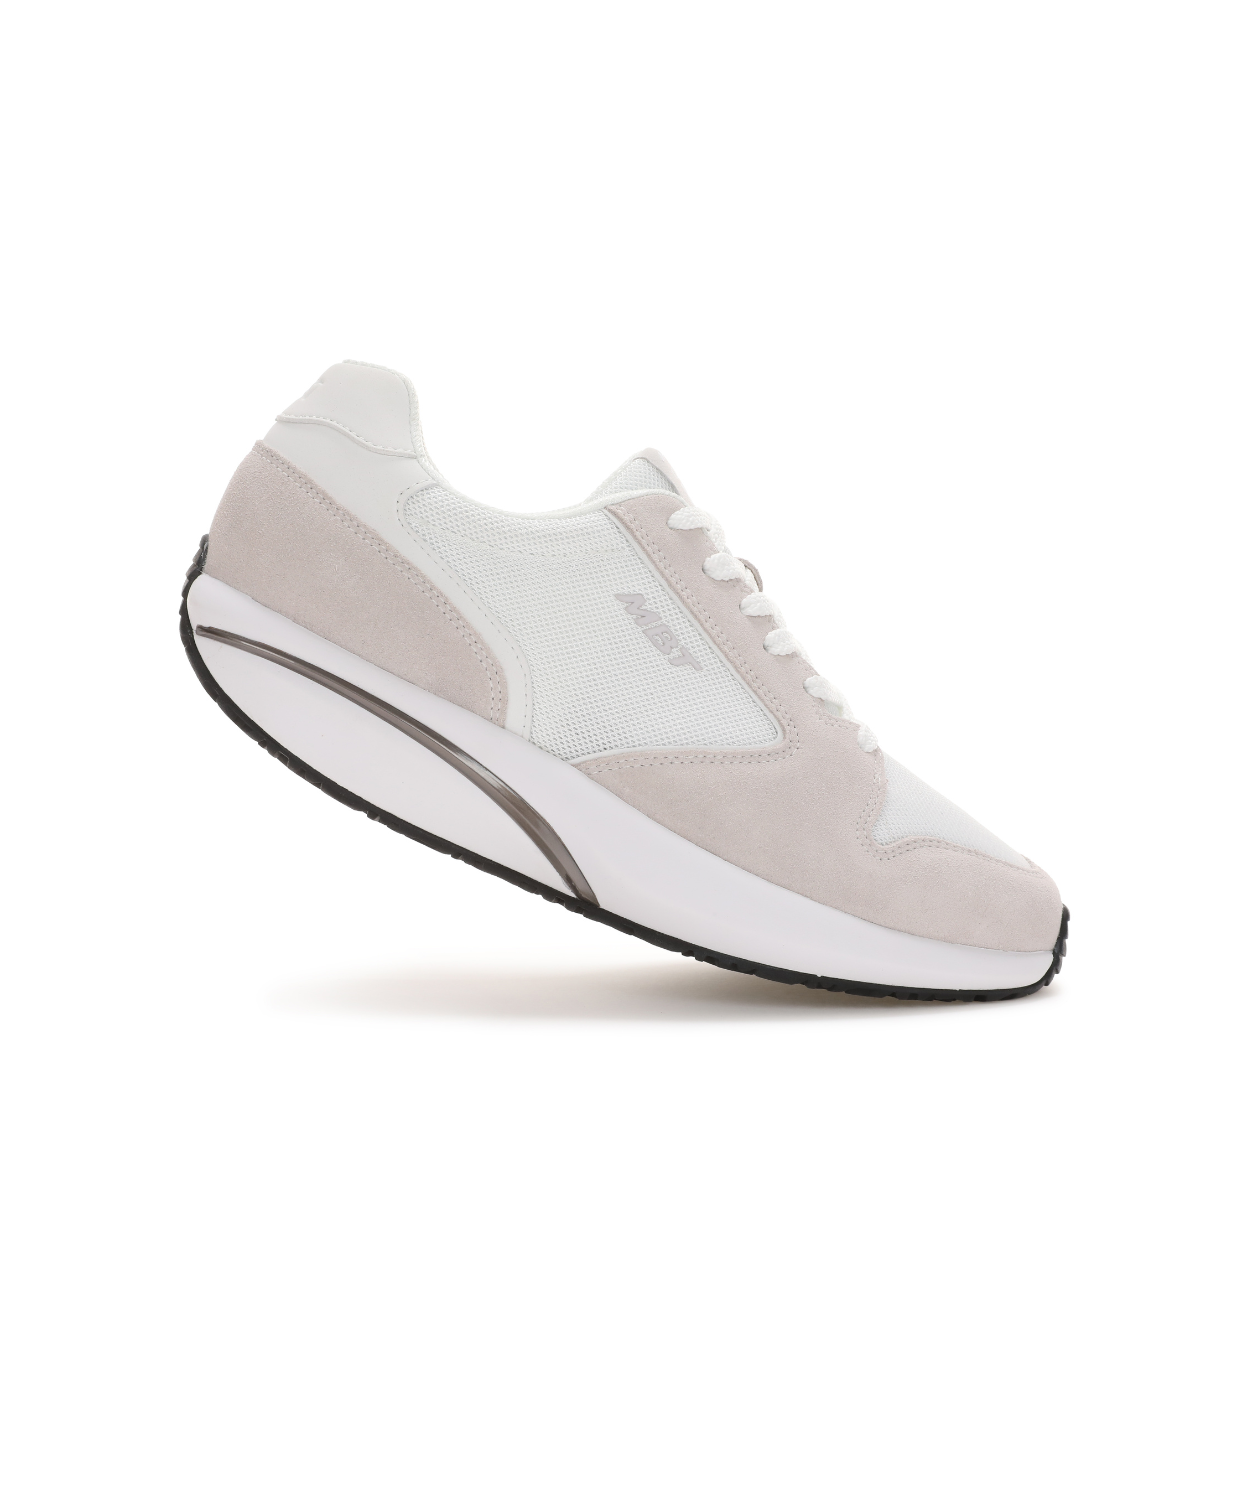 MBT MBT-1997 Classic II White Mens Sneakers